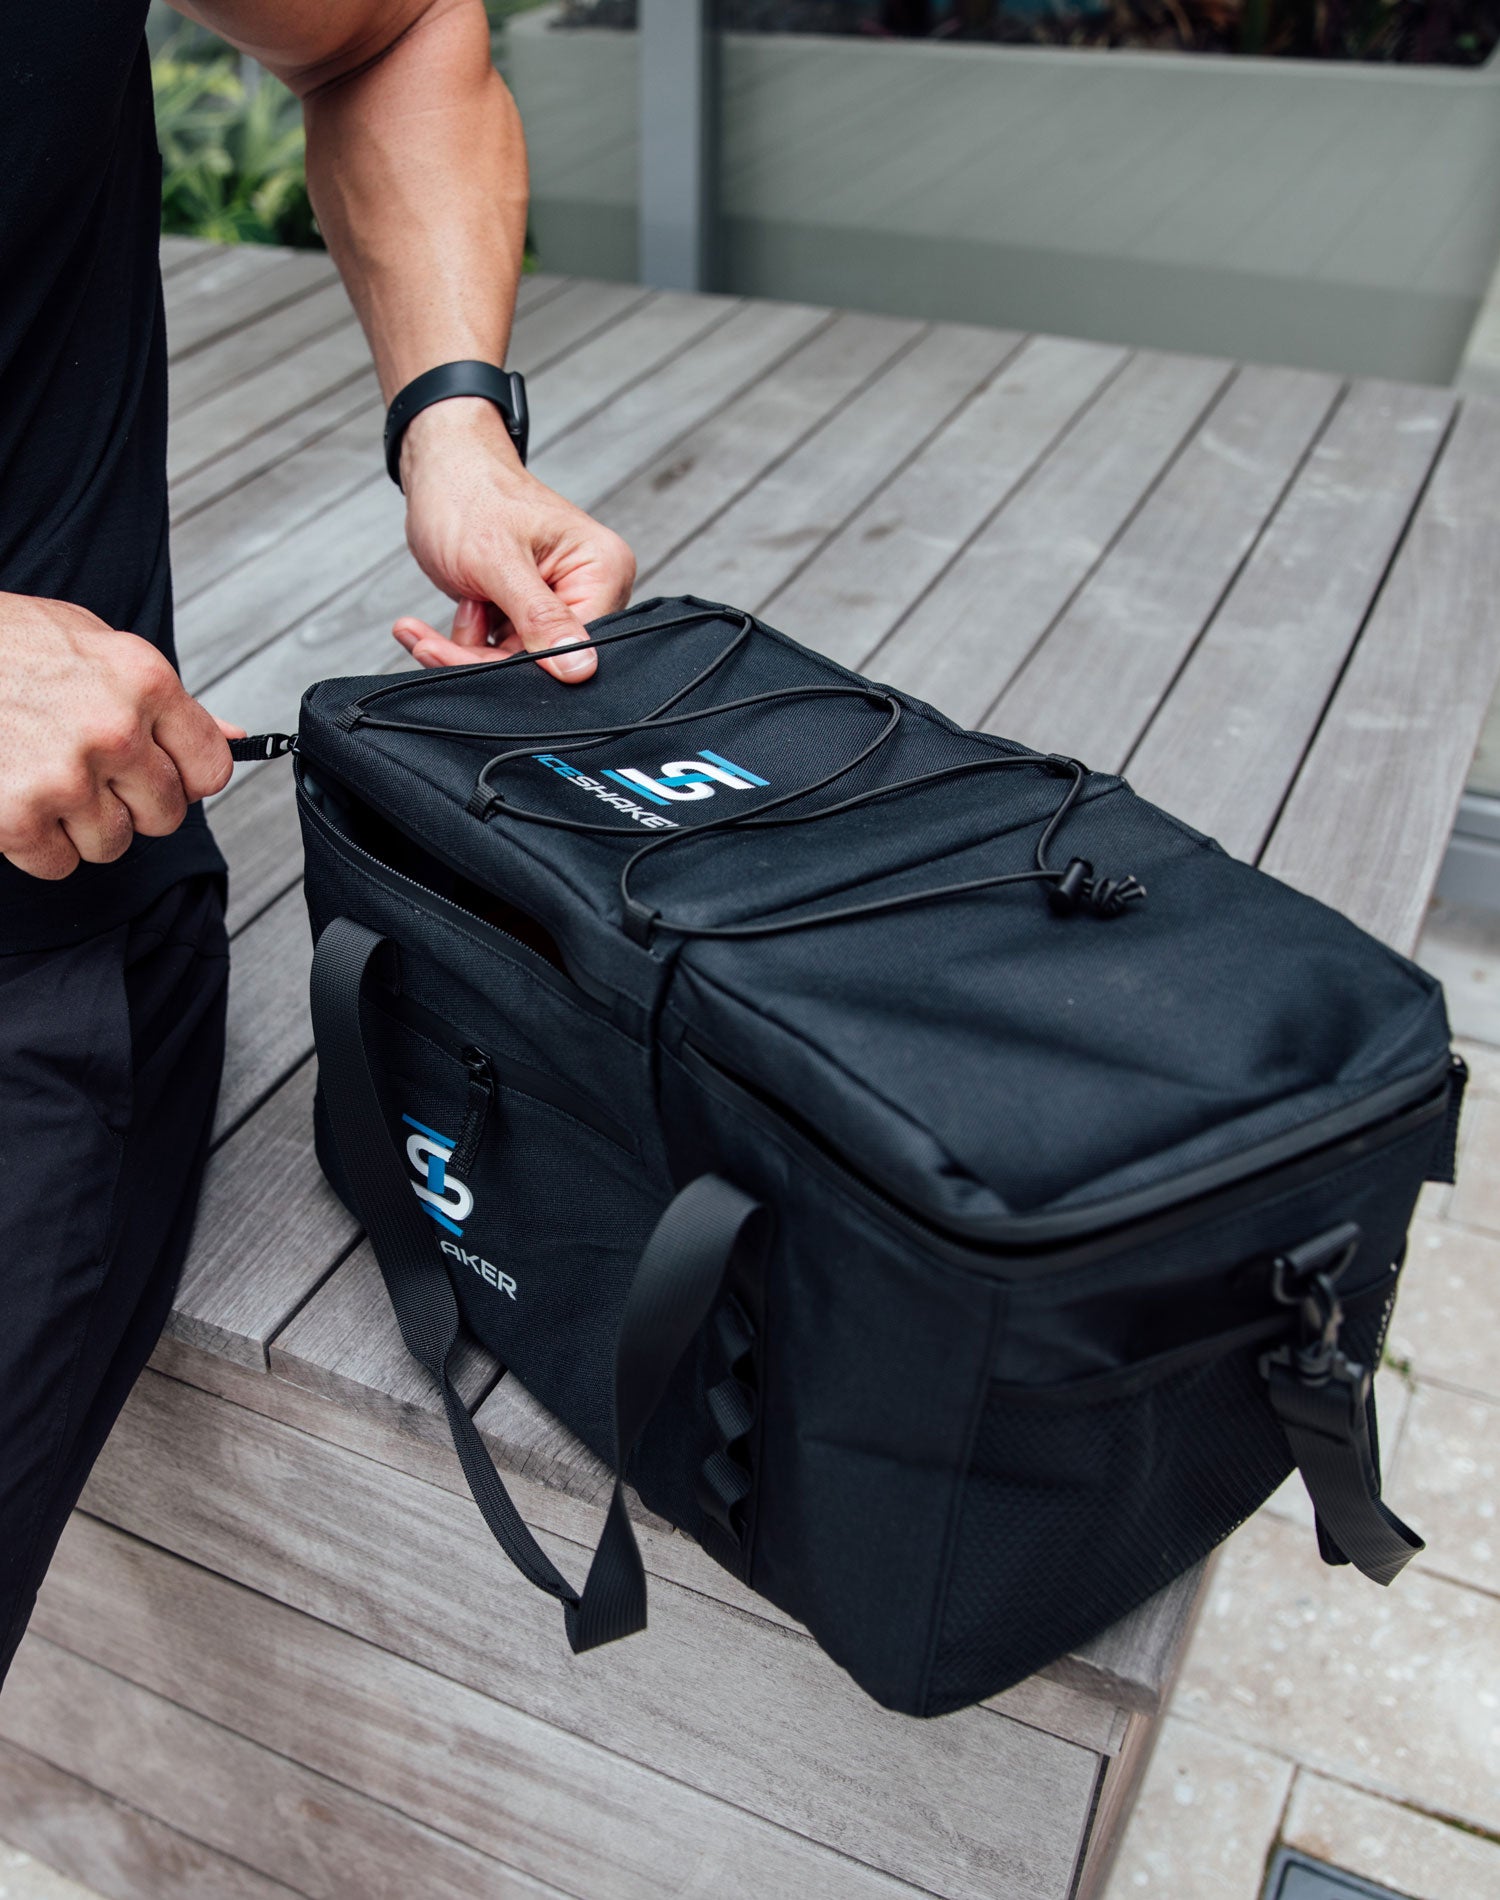 A close up image of the Ice Shaker's The Duffel Bag on a wooden platform. A man is sitting next to The Duffel and is opening the top of The Duffel with the zipper.